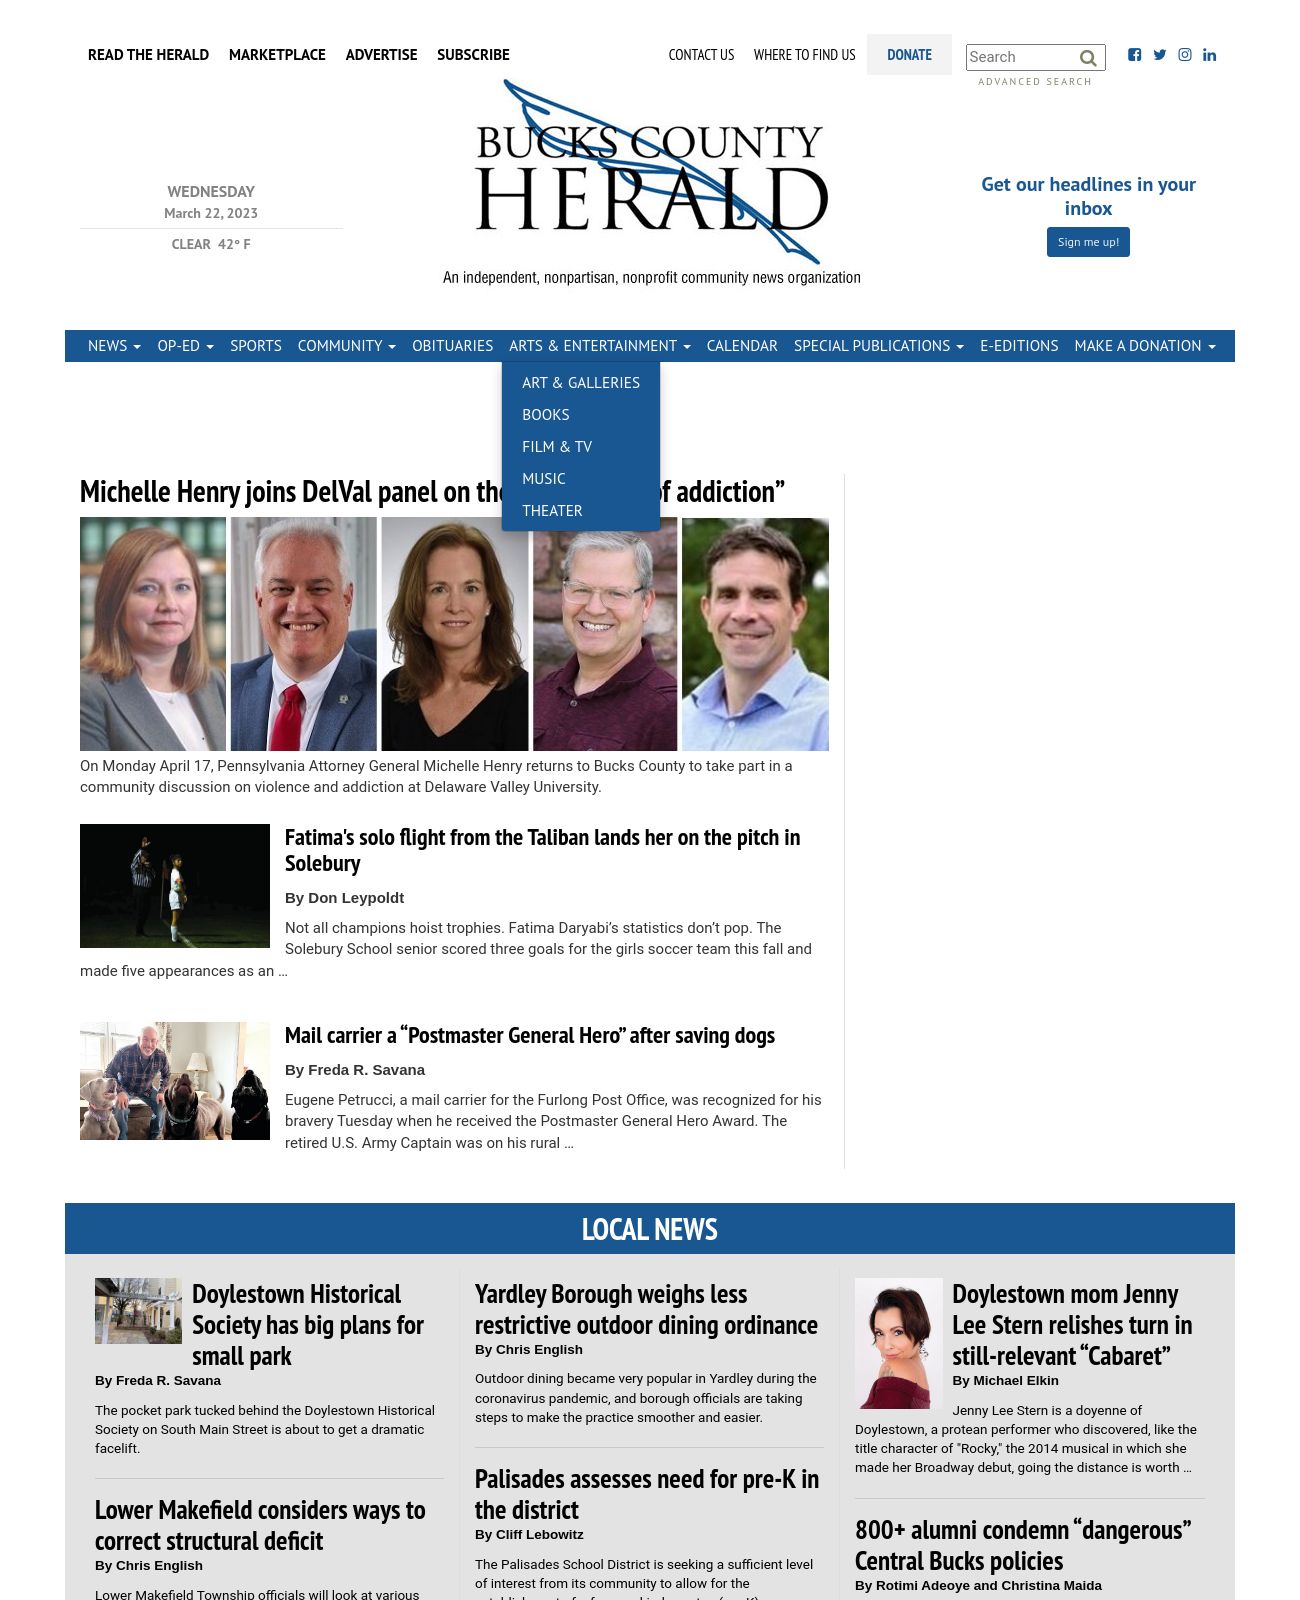 Bucks County Herald at 2023-03-22 06:27:54-04:00 local time